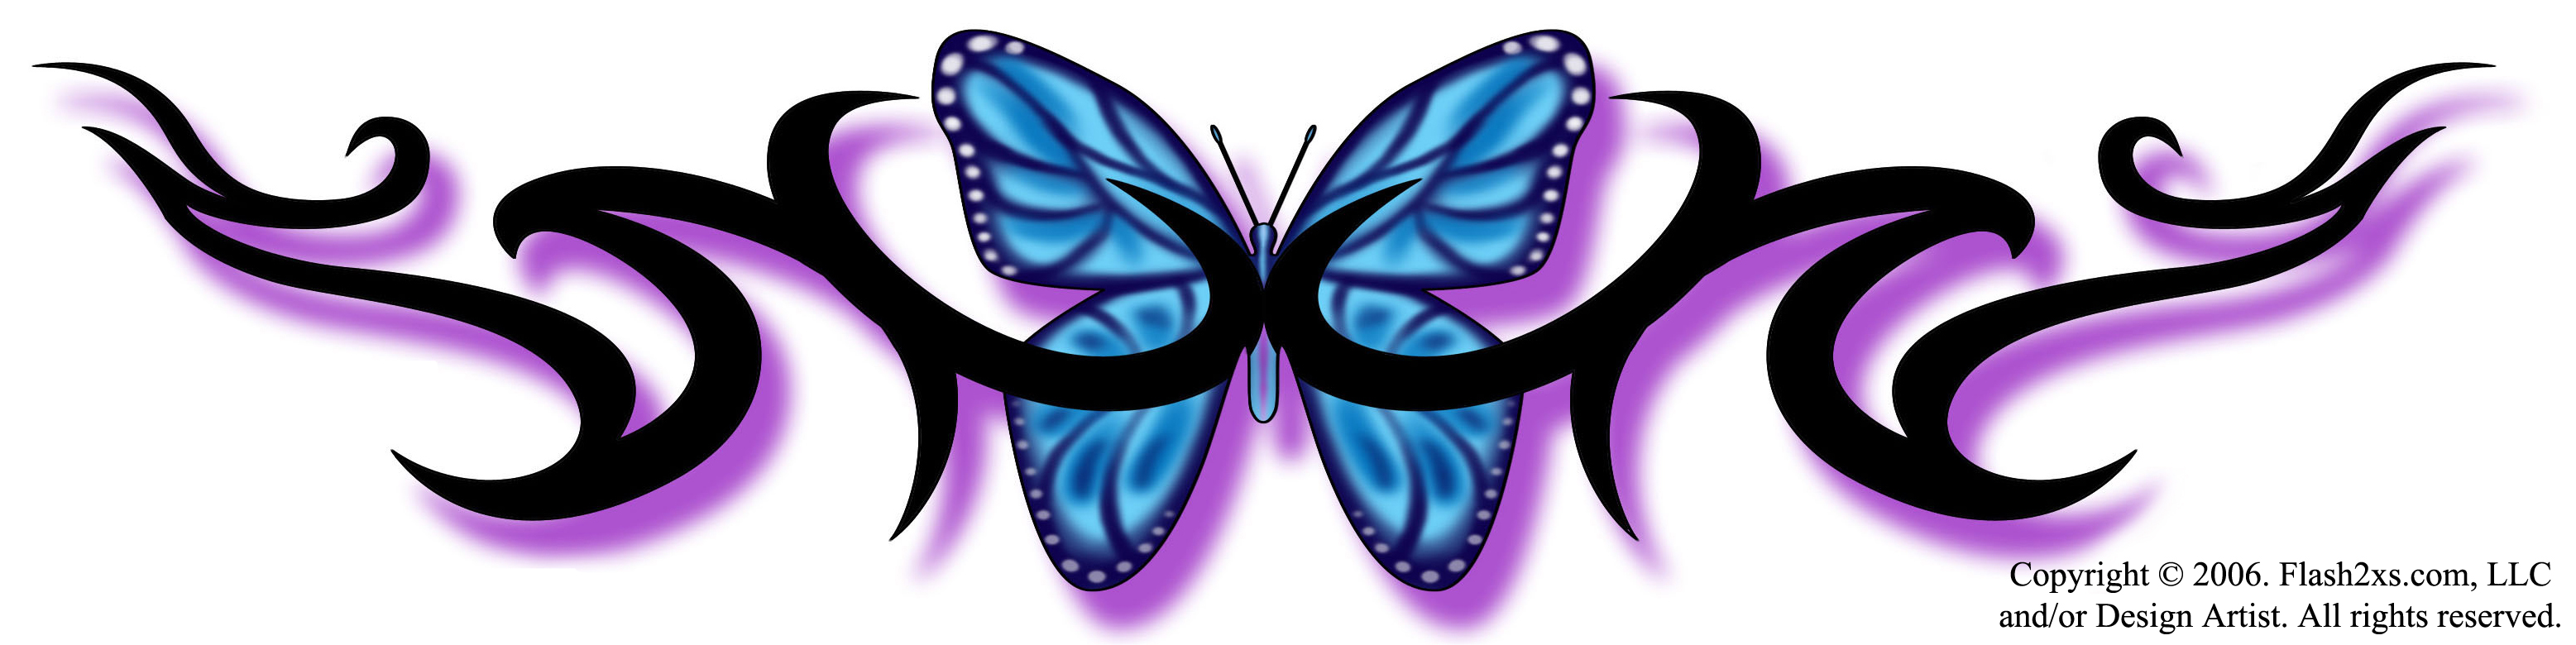 Sexy Purple Glowing Butterfly Lower Back Placement